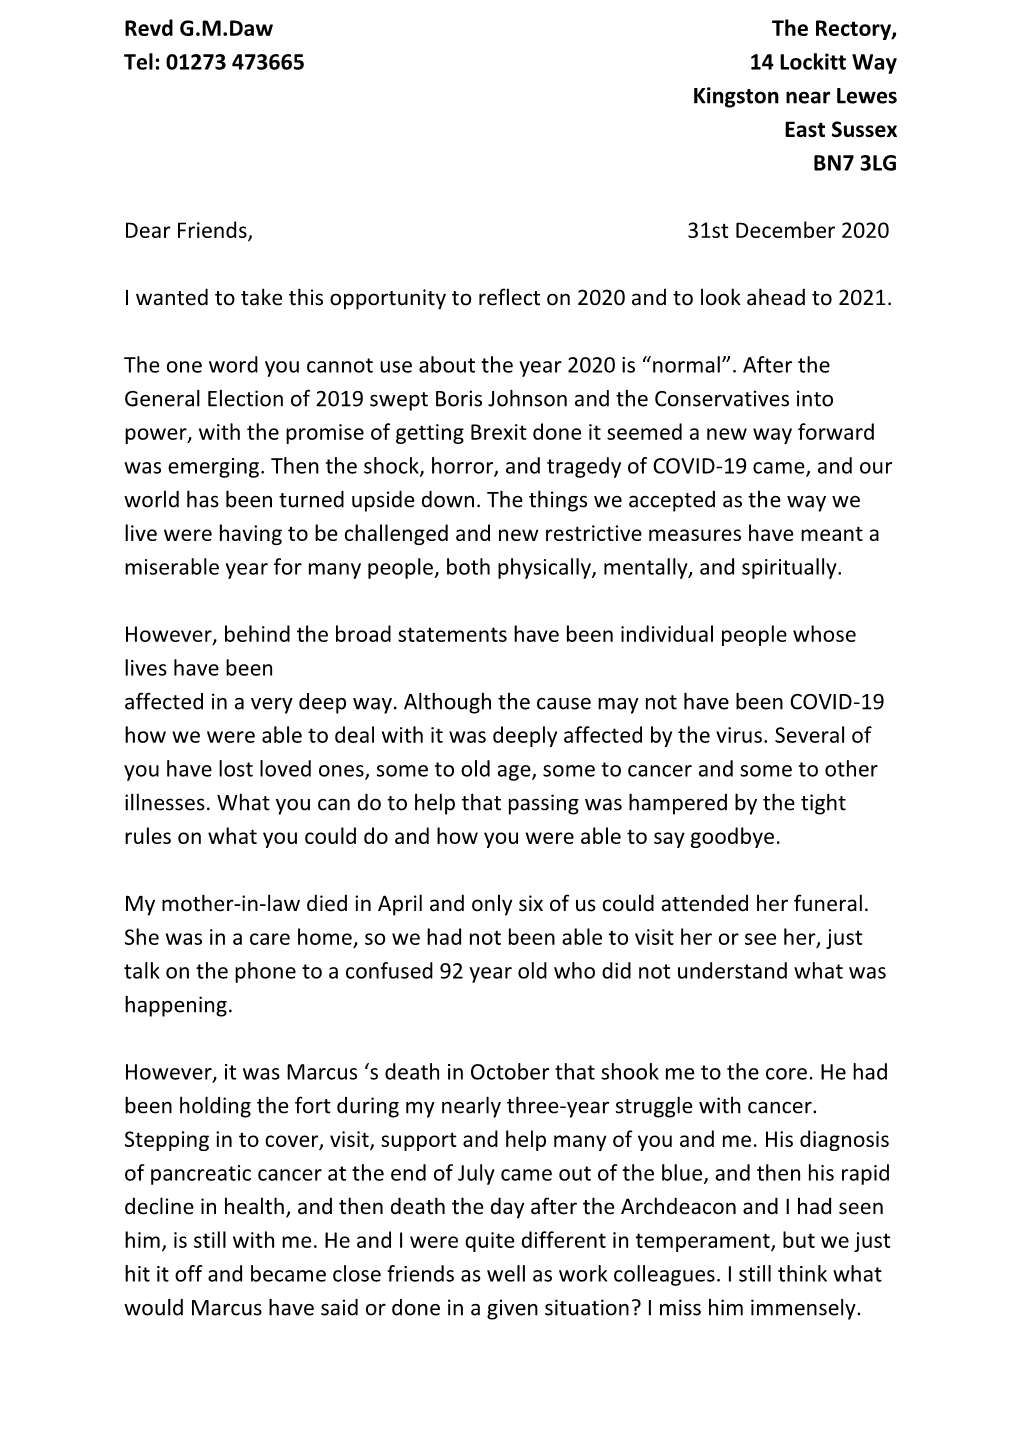 New Year Letter from the Revd Geoff